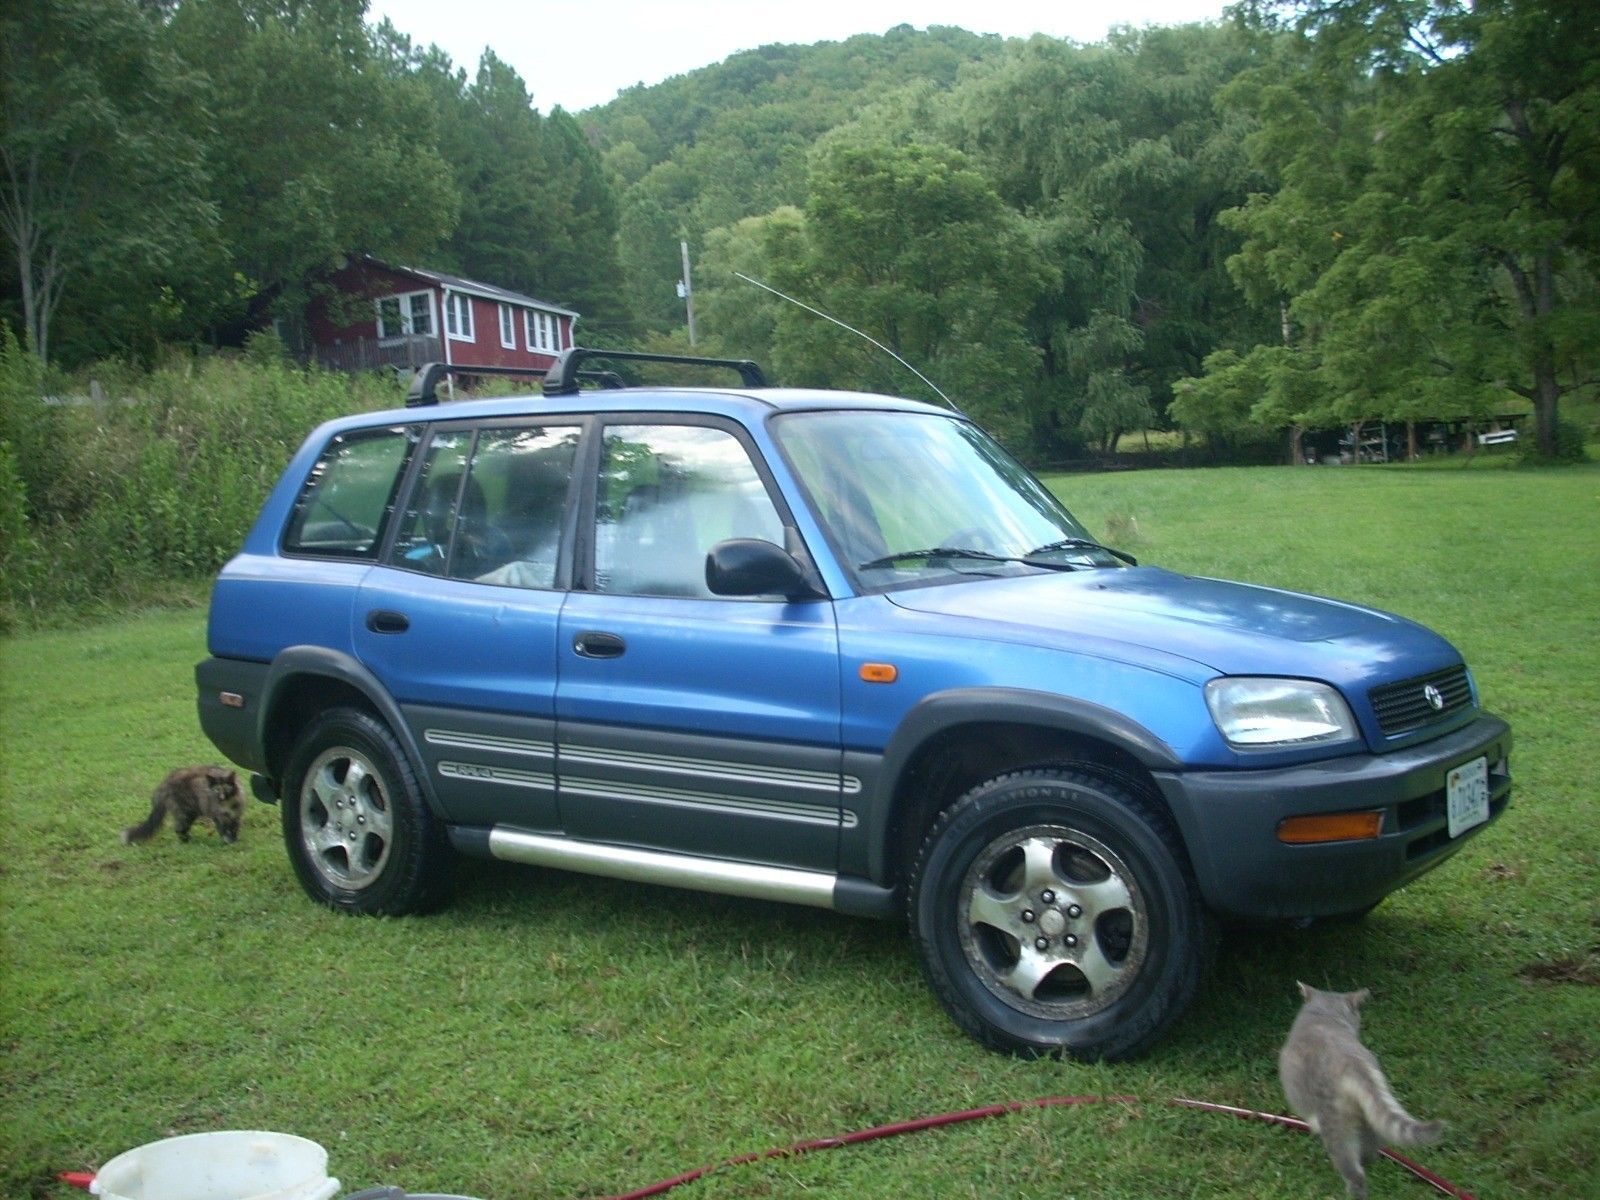 1997 Toyota RAV4 Blue 1997 Toyota RAV4 All Wheel Drive Runs No Reserve 2022  2023 is in stock and for sale - Price & Expert Review 2022-2023